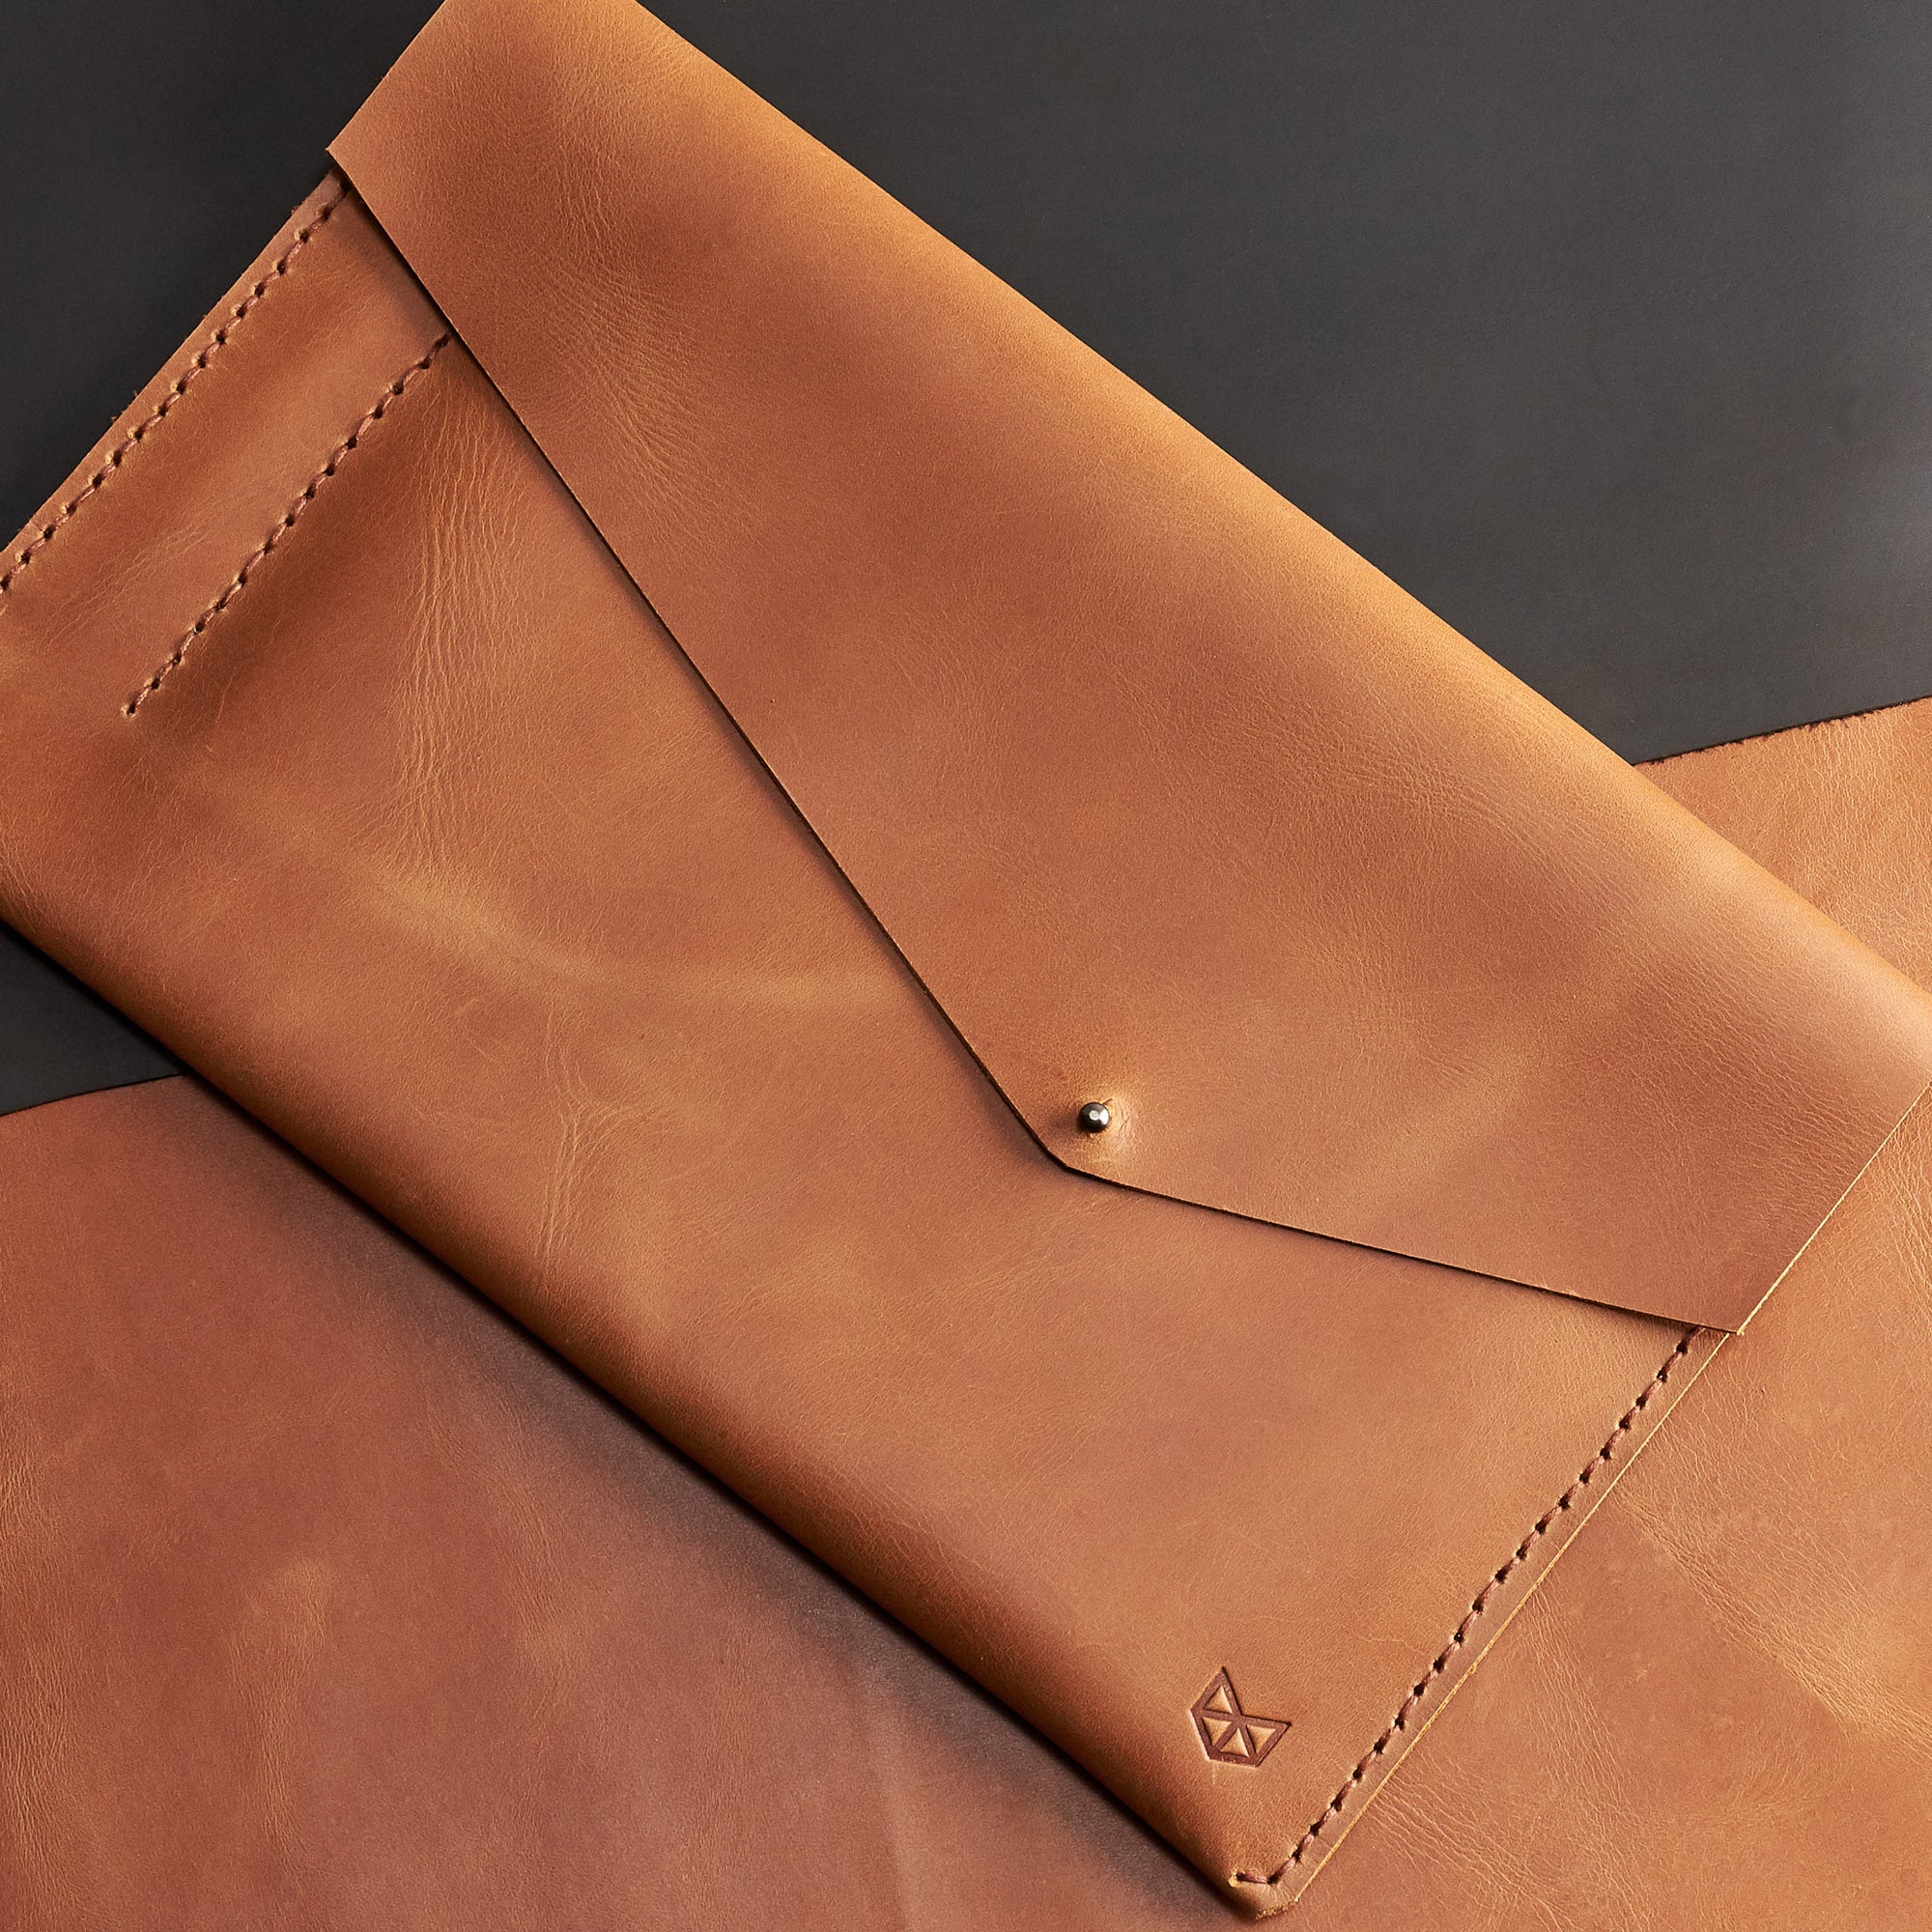 Style. iPad Sleeve. iPad Leather Case Tan With Apple Pencil Holder by Capra Leather